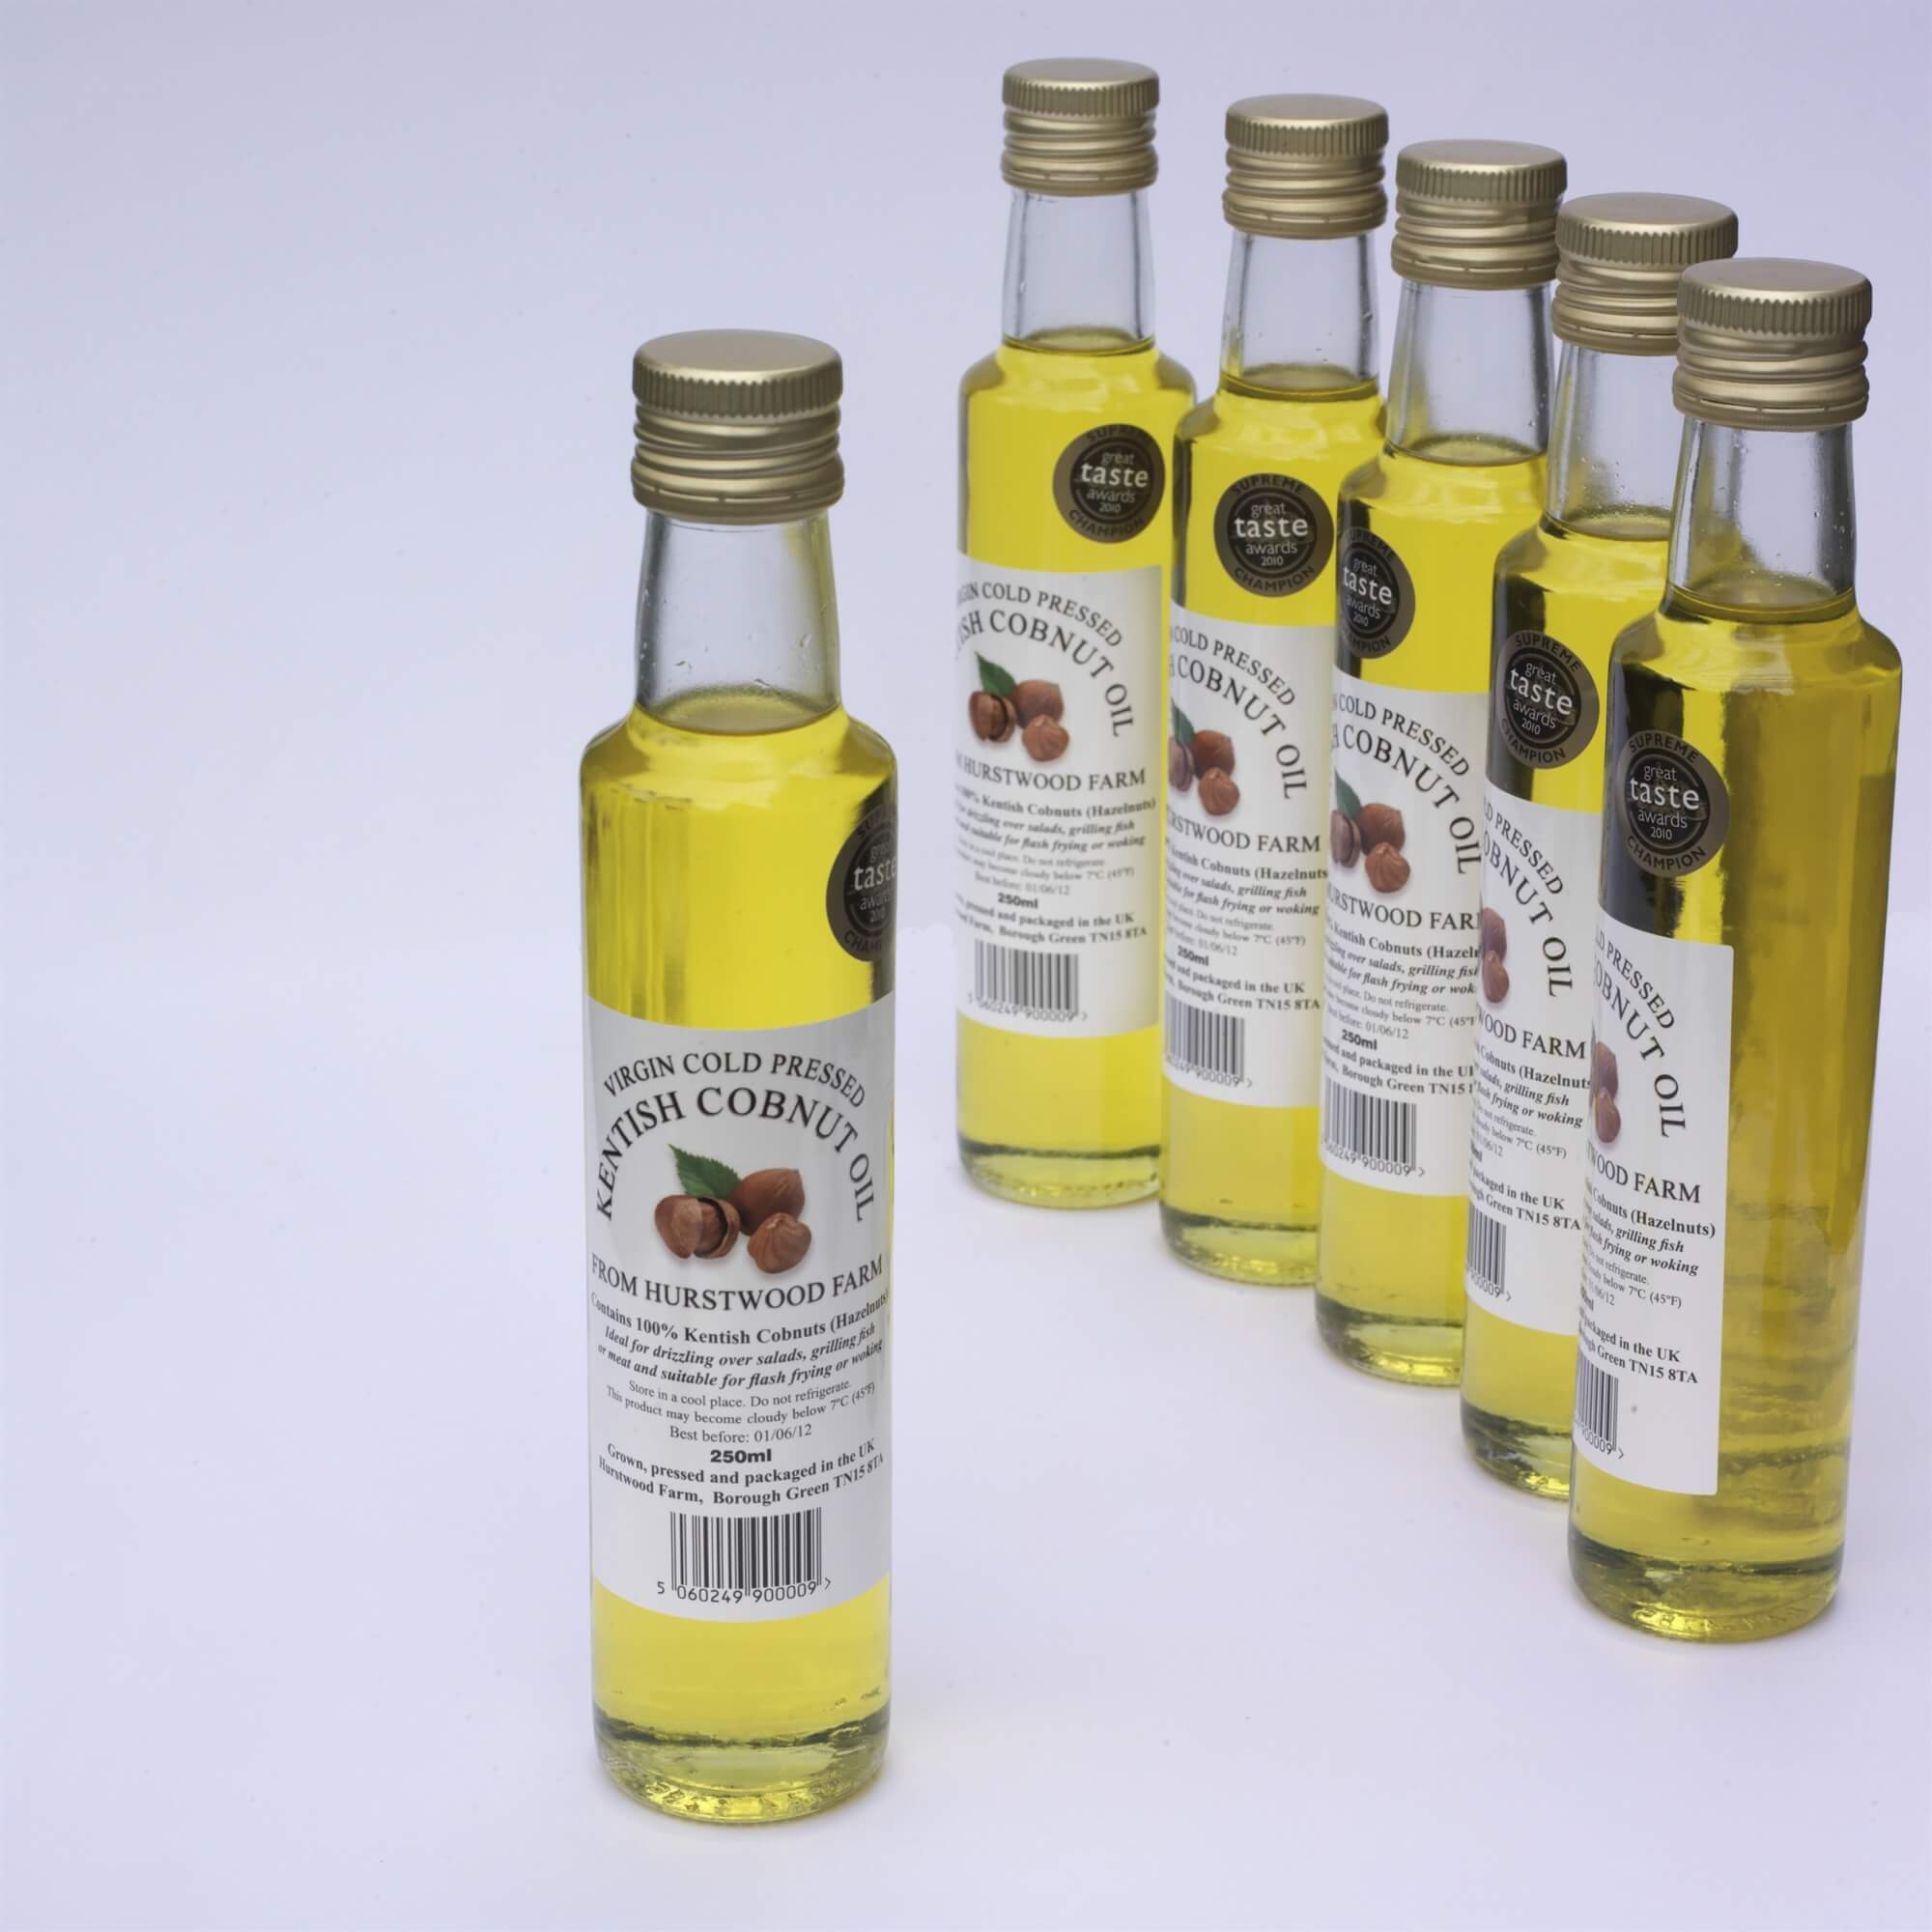 Virgin Cold Pressed Kentish Cobnut Oil - Our Kentish Cobnut Oil has featured on ITV Ade In Britain, BBC The Hairy Bikers, and ITV The Hungry Sailors.